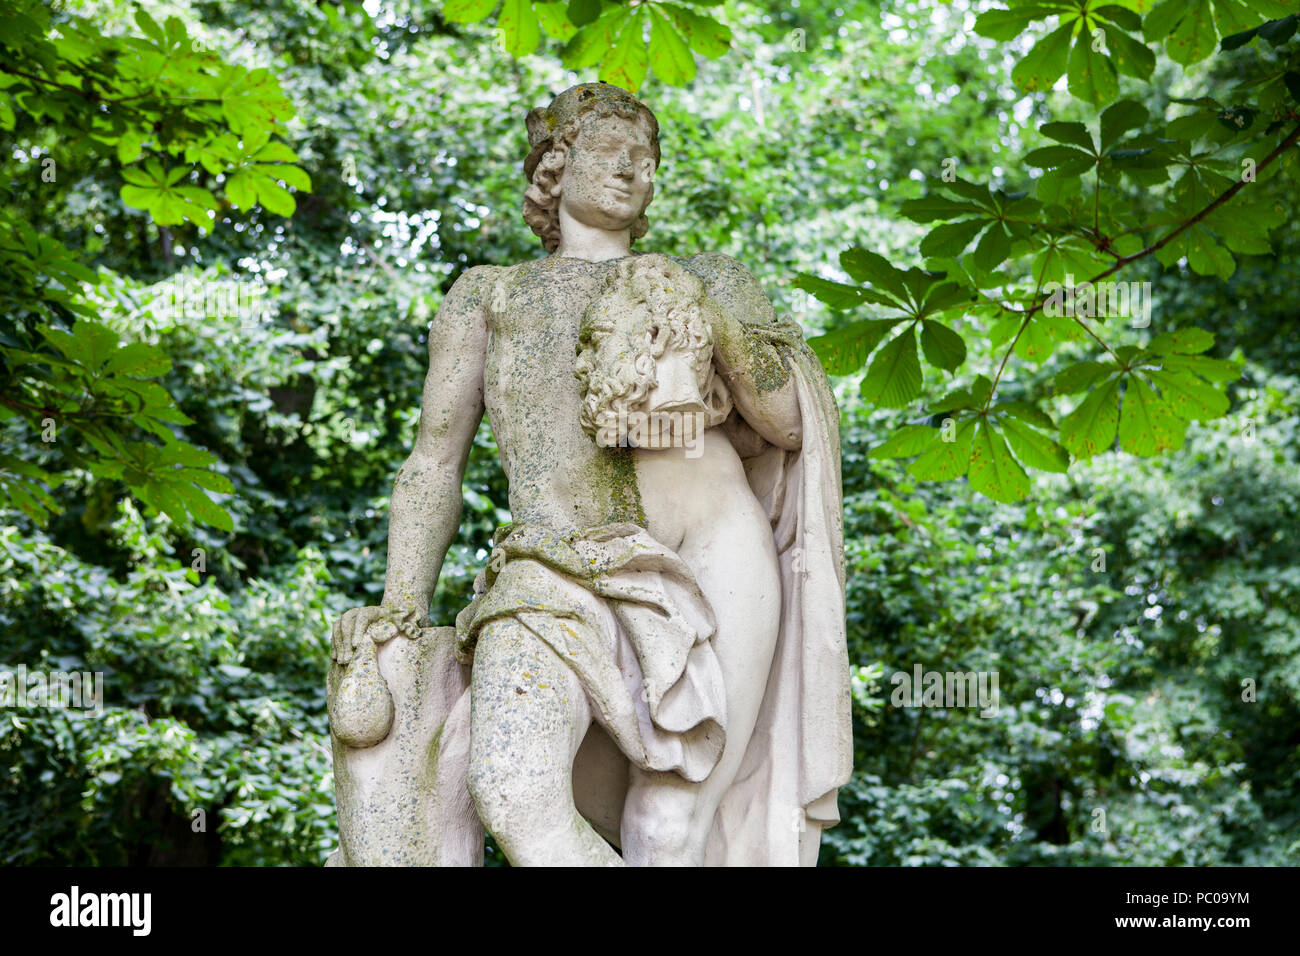 Statue of Mercury or Hermes at Nordkirchen Moated Palace, Germany Stock Photo